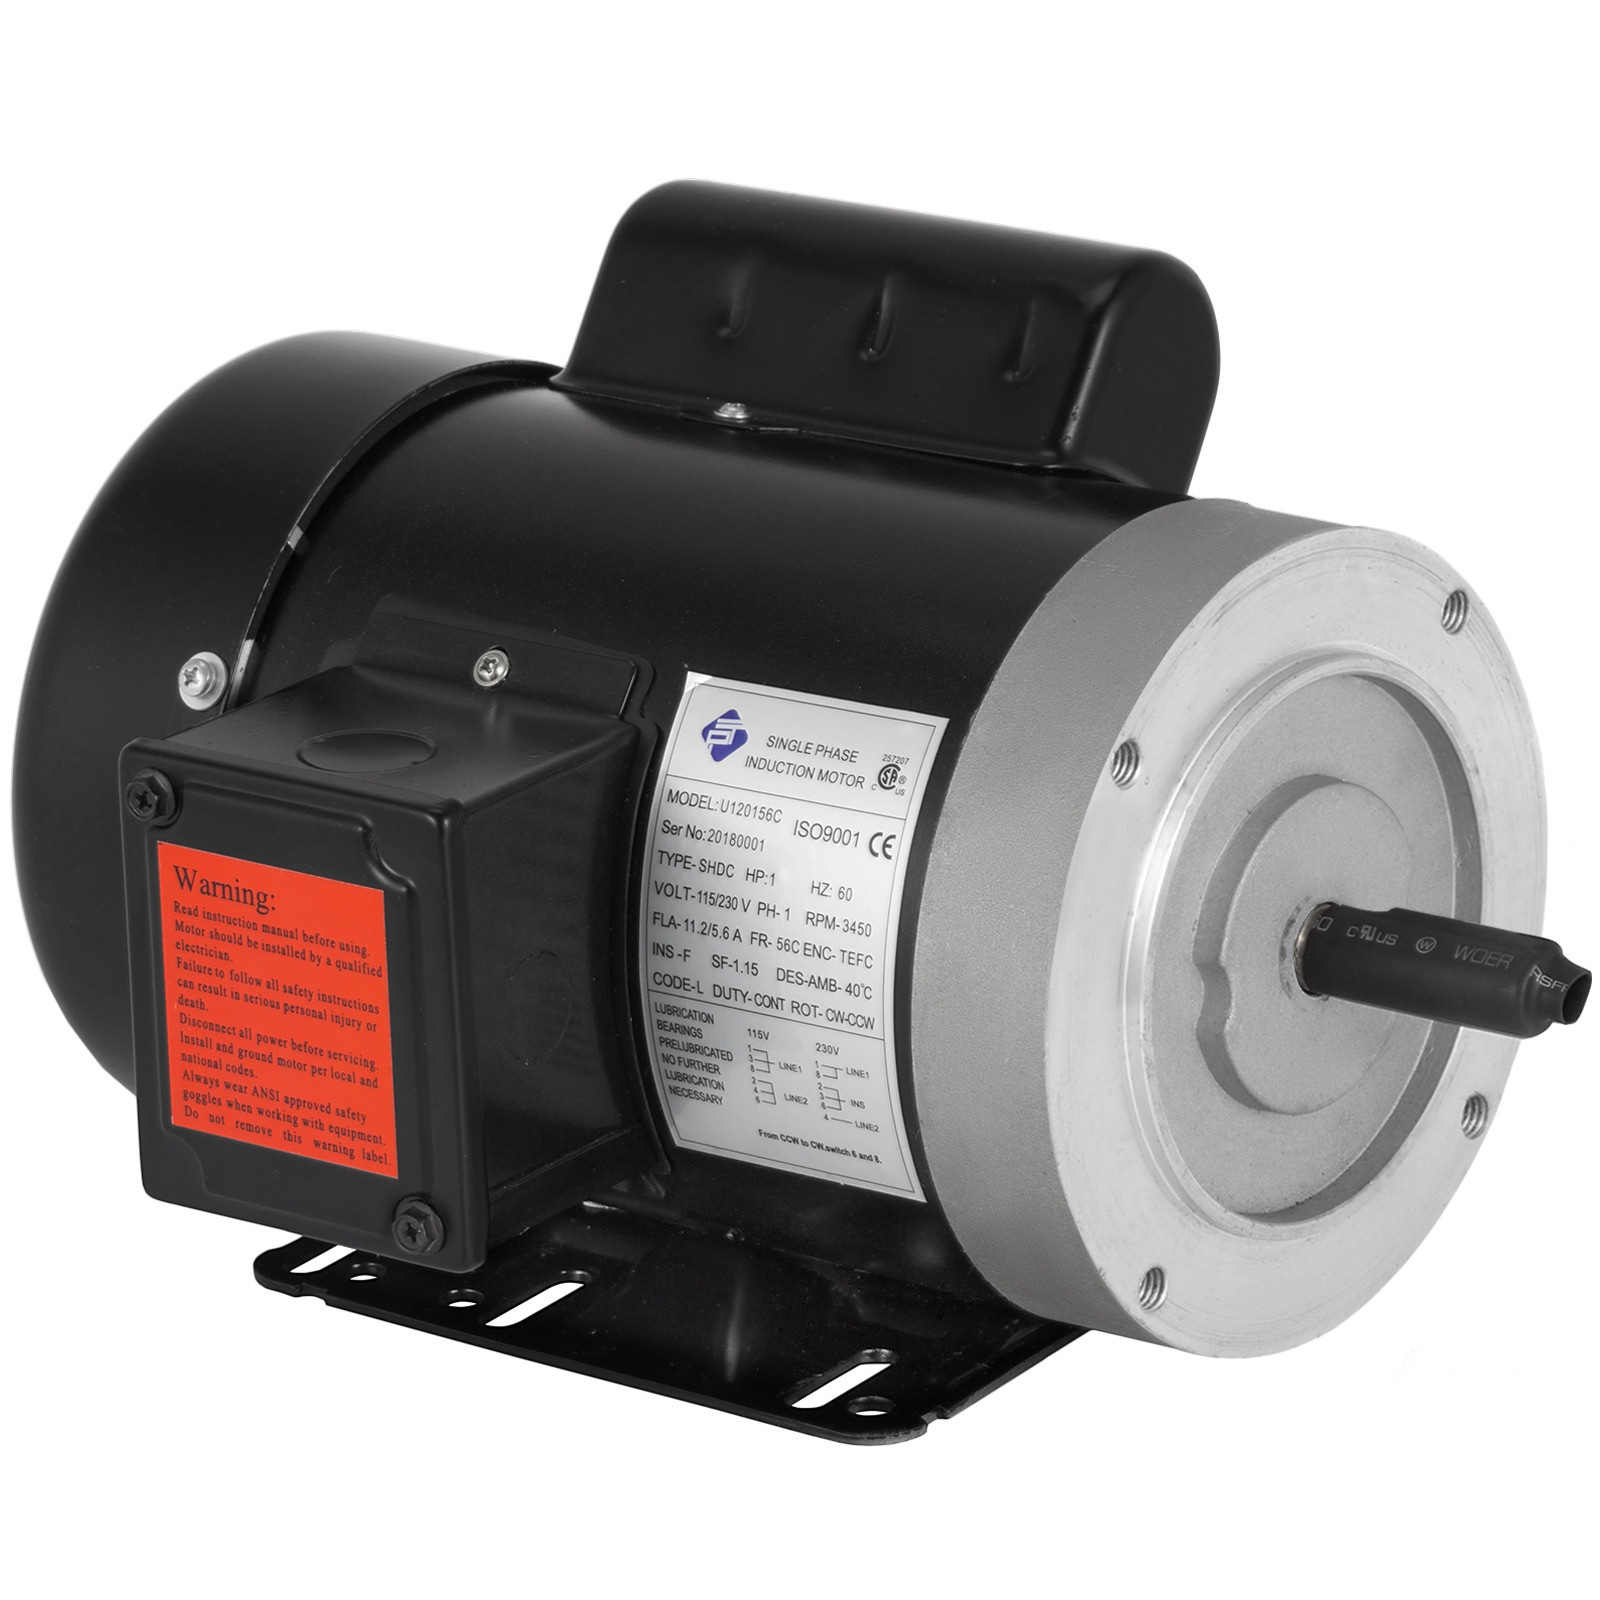 1HP 1800 RPM 3 PHASE STAINLESS STEEL ELECTRIC MOTOR 56C FREE SHIPPING 